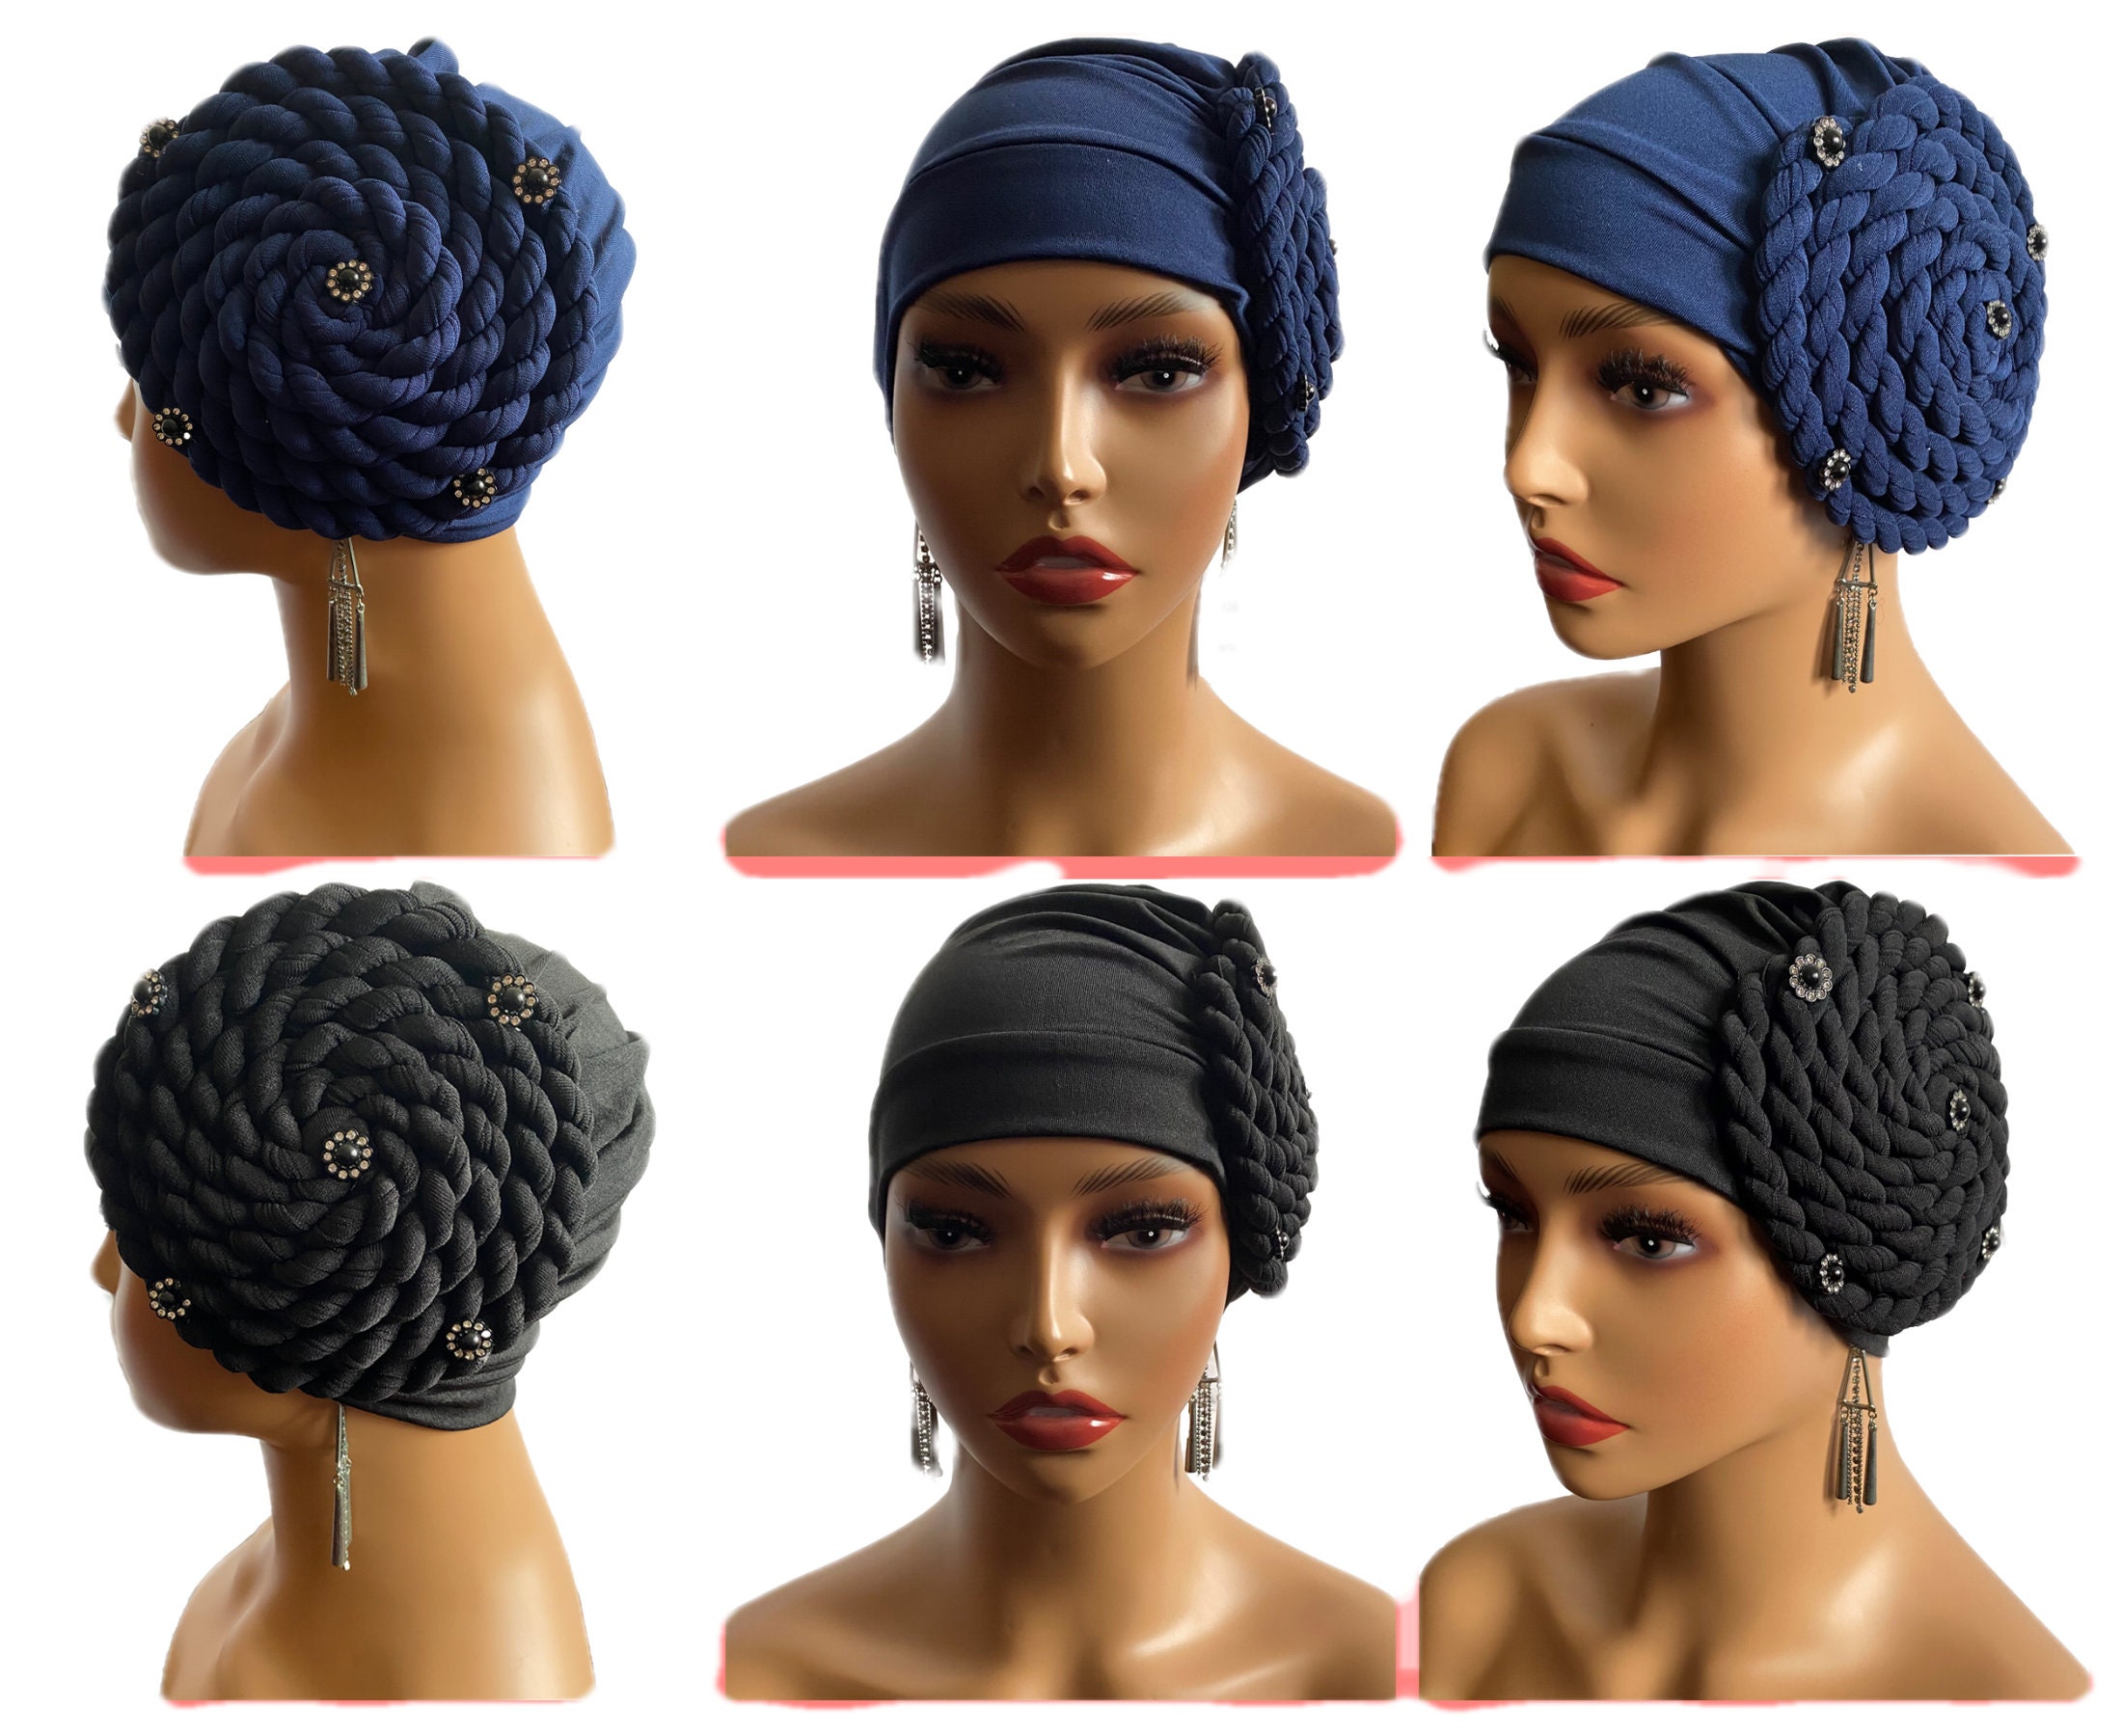 Braided Nylon Headwraps, Sailor Knot Headband, One Size Fits All